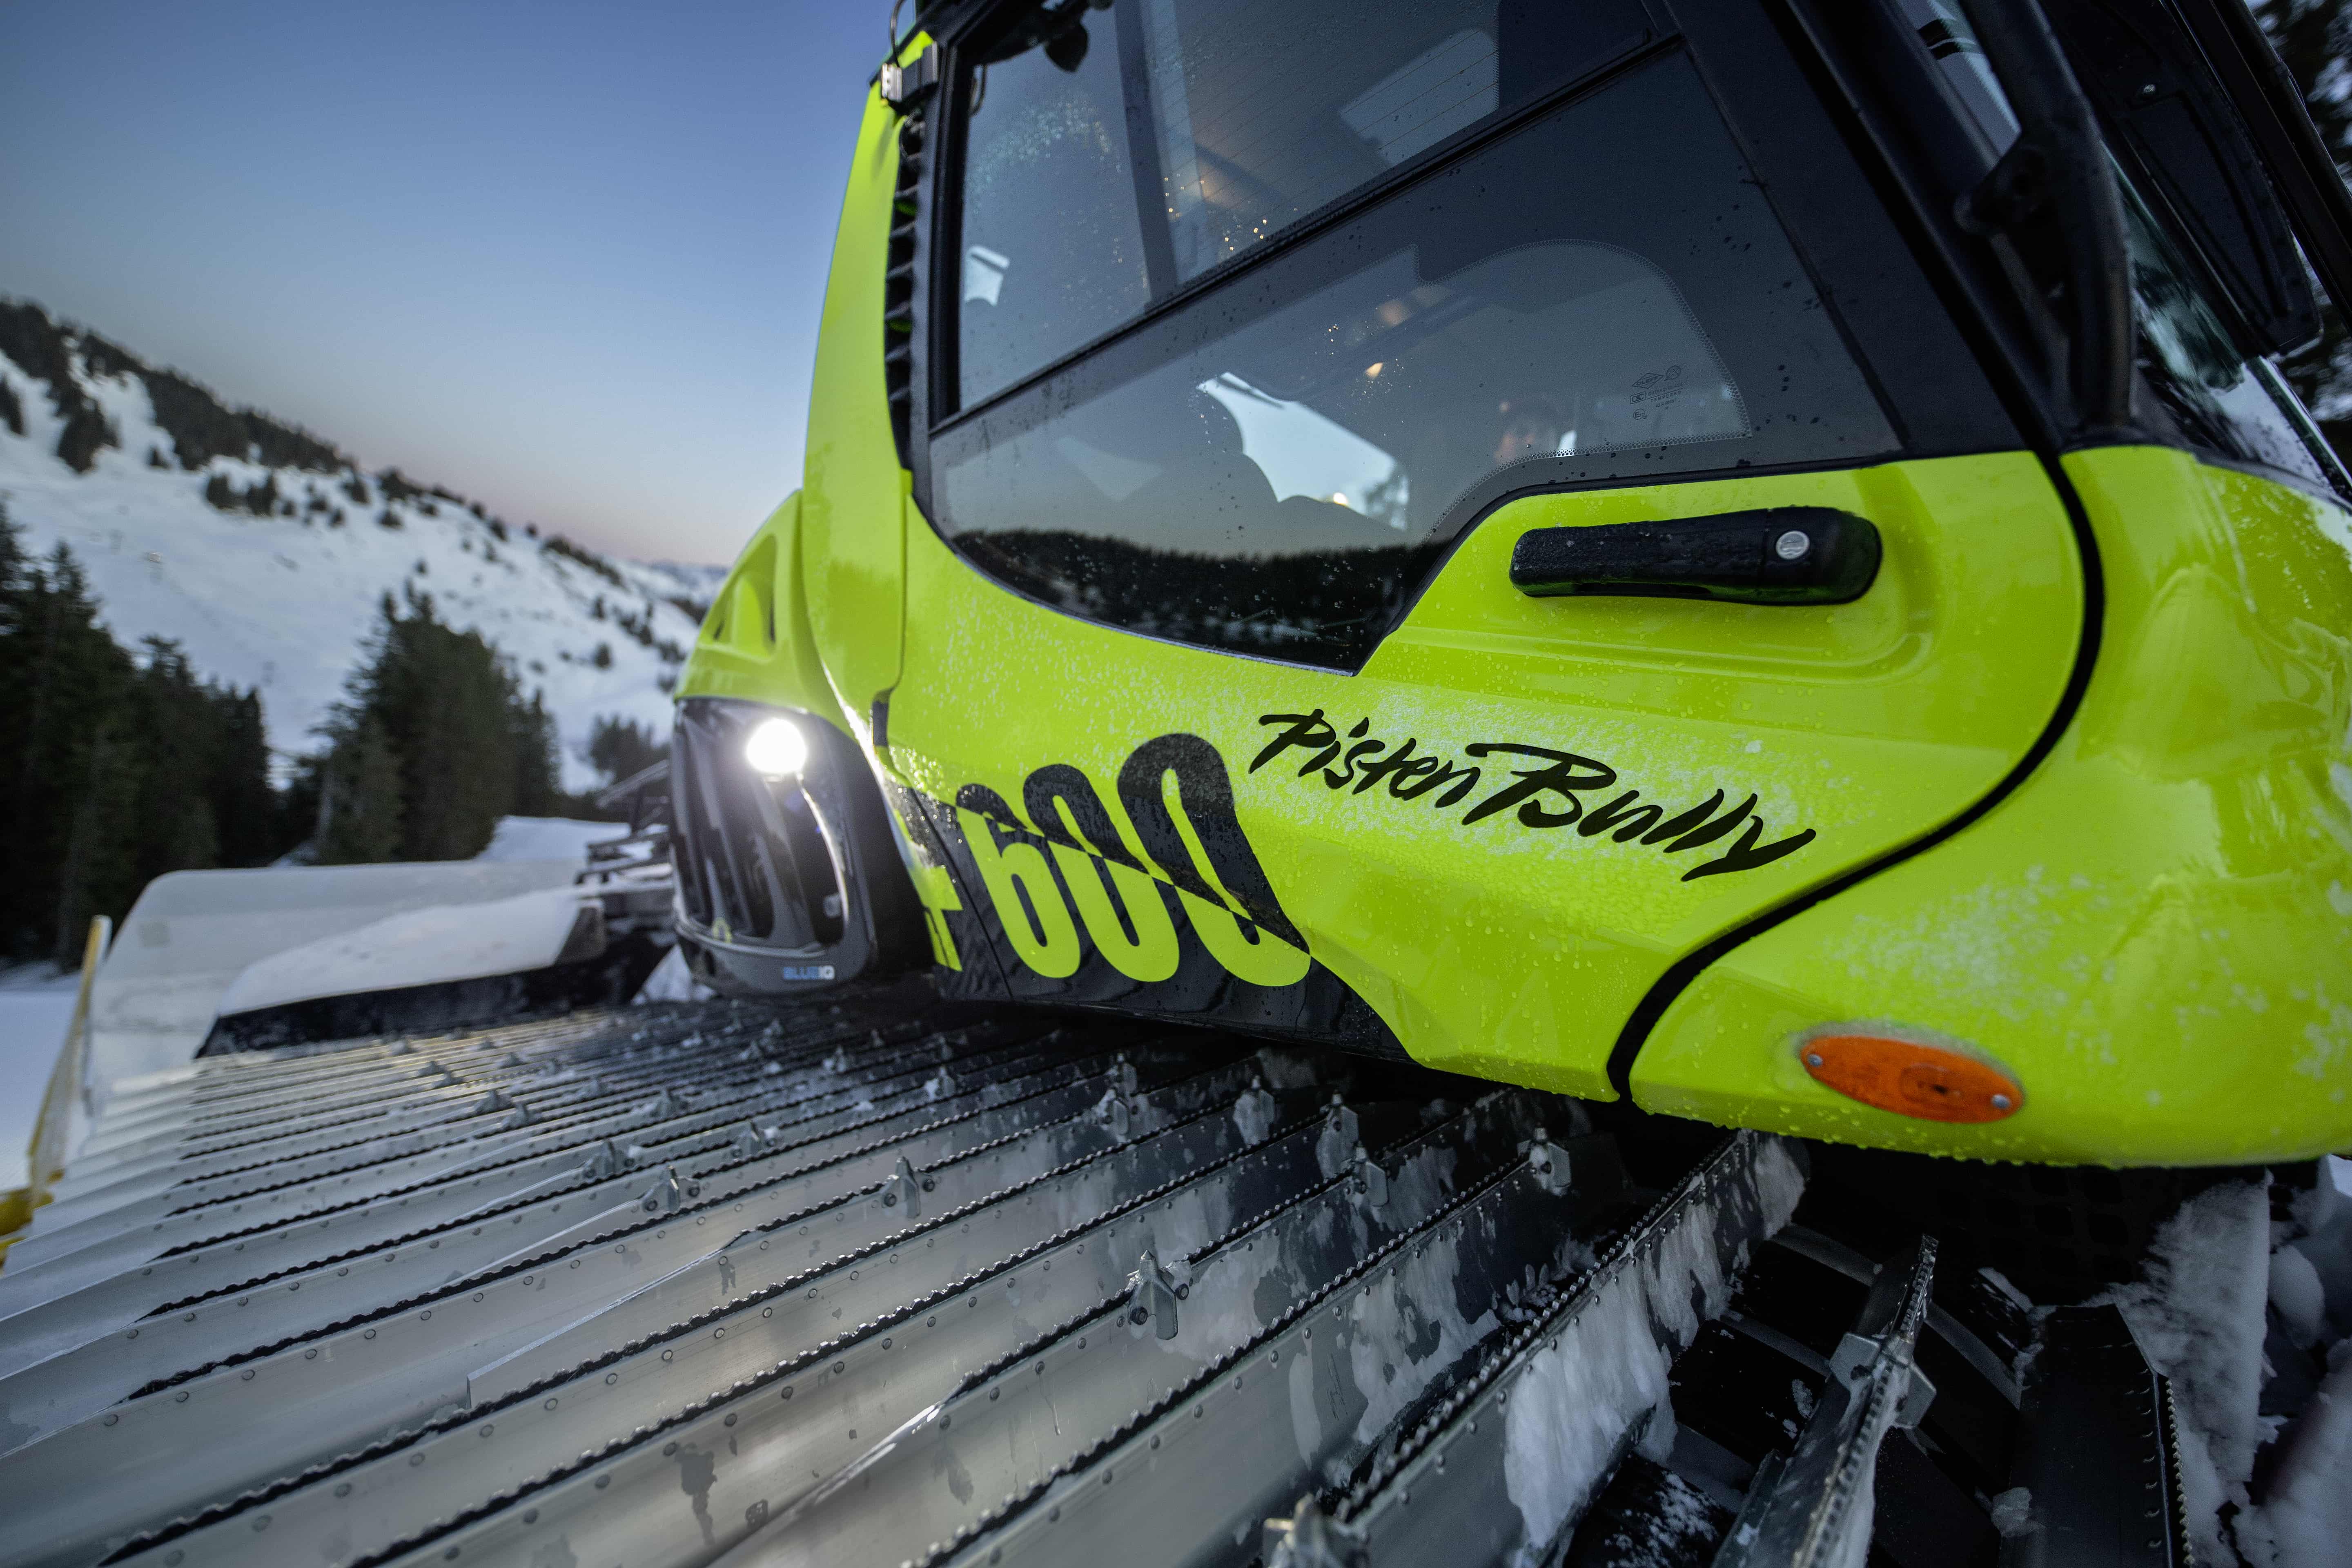 PistenBully 600 E+: Diesel-electric powered snow groomer